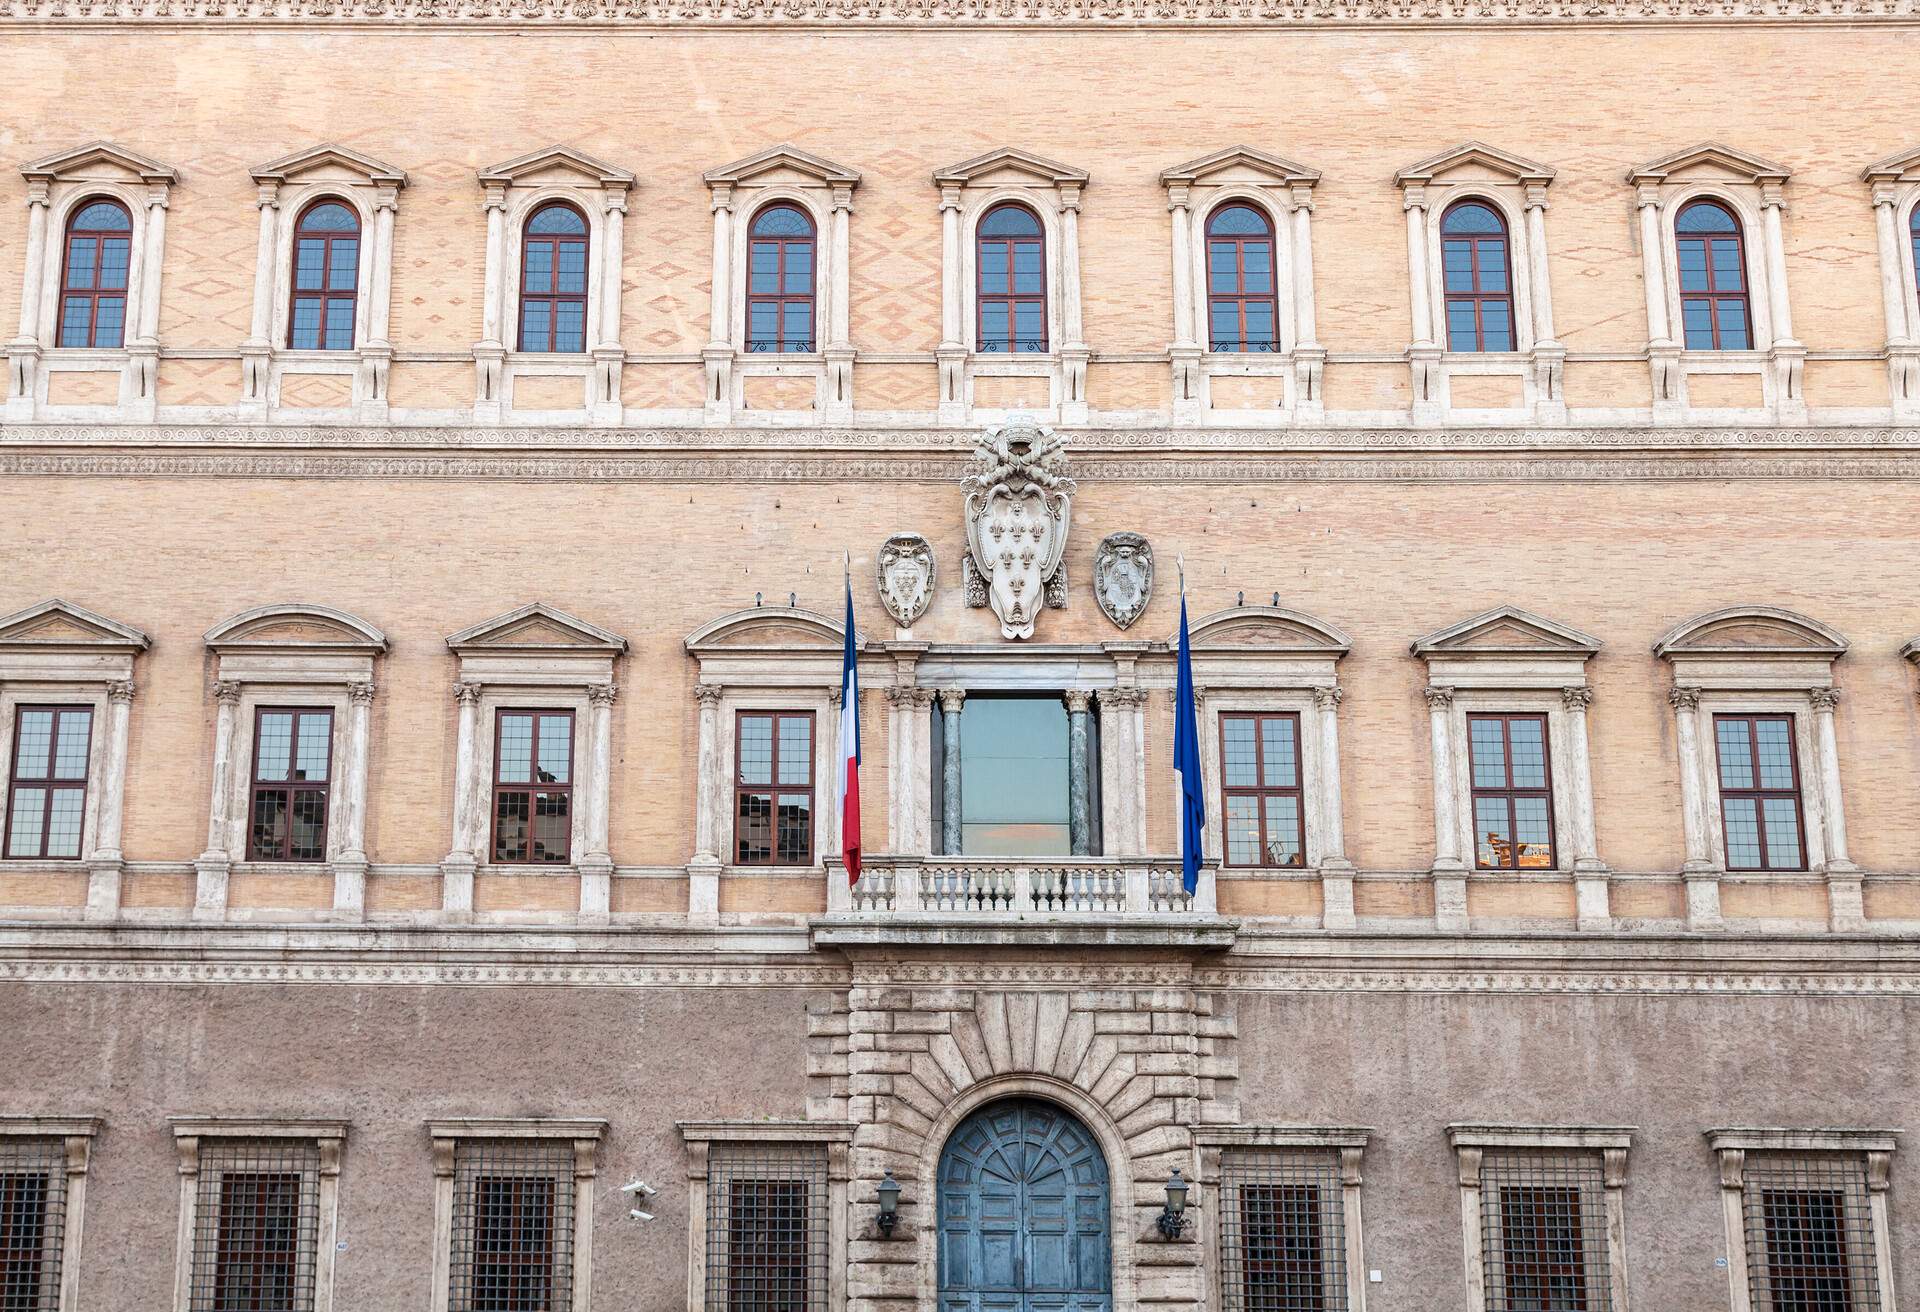 DEST_ITALY_ROME_FARNESE-PALACE_GettyImages-629323316